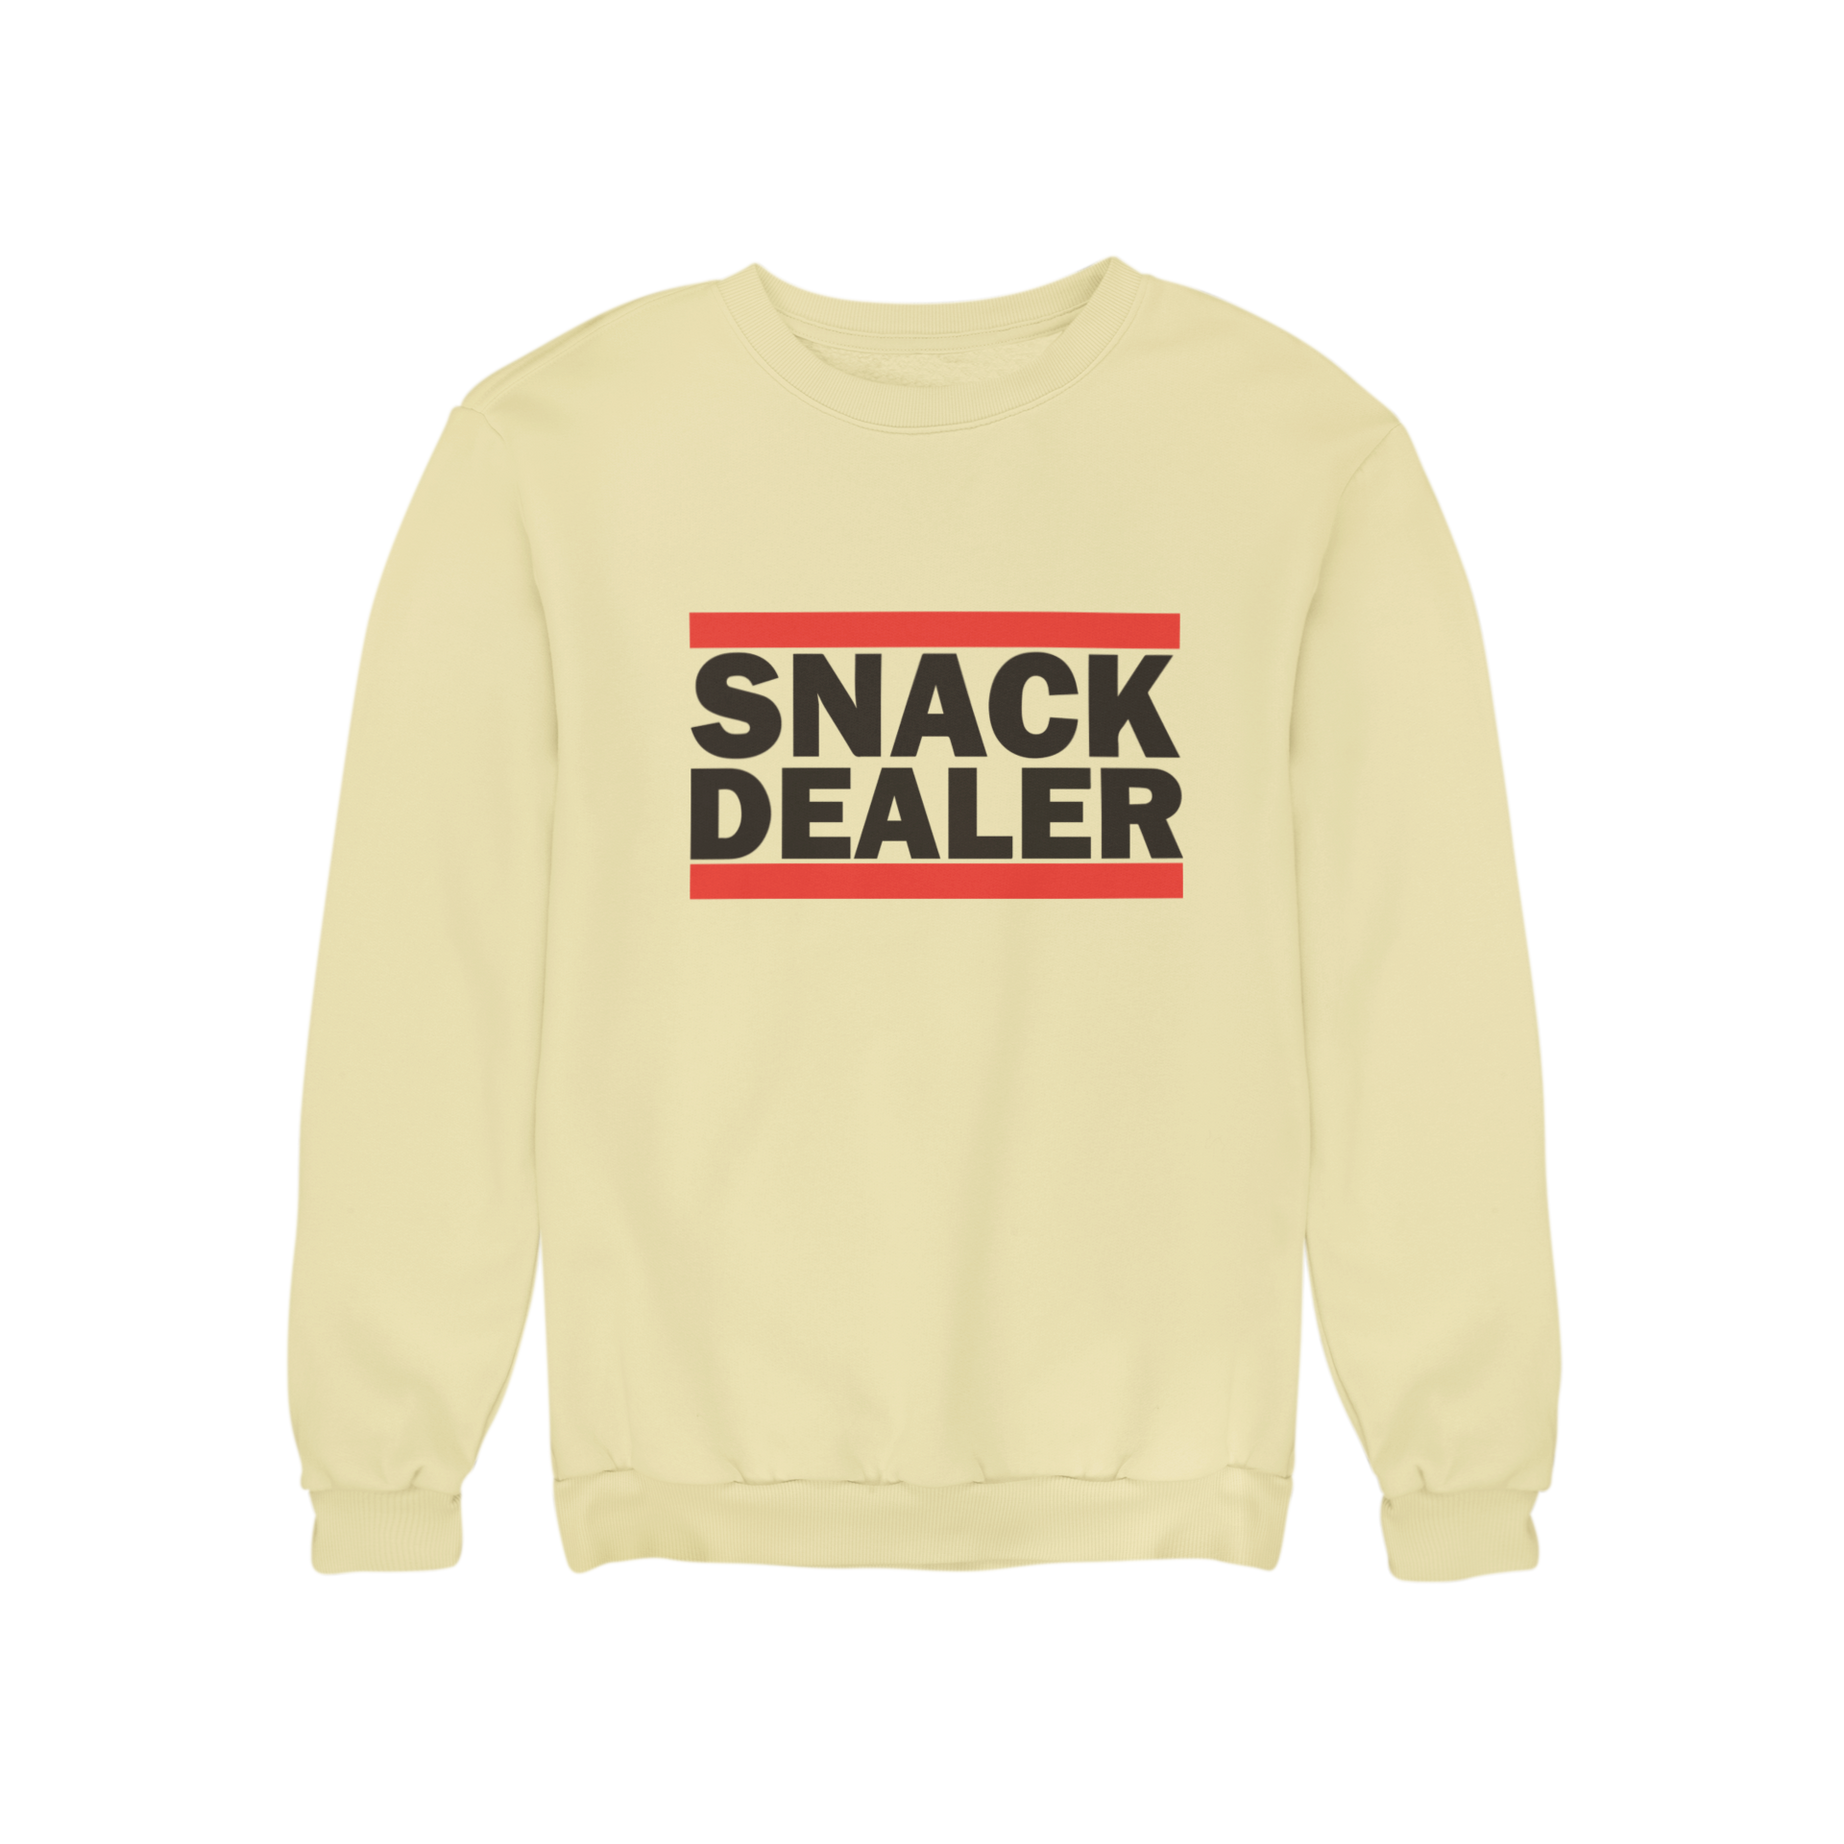 Looking for an awesome sweatshirt? Teevolution has just what you need – a sweatshirt with the slogan "snack dealer". This stylish sweatshirt is perfect for anyone who loves snacks and wants to show off their love for all things yummy! Get yours today at Teevolution.